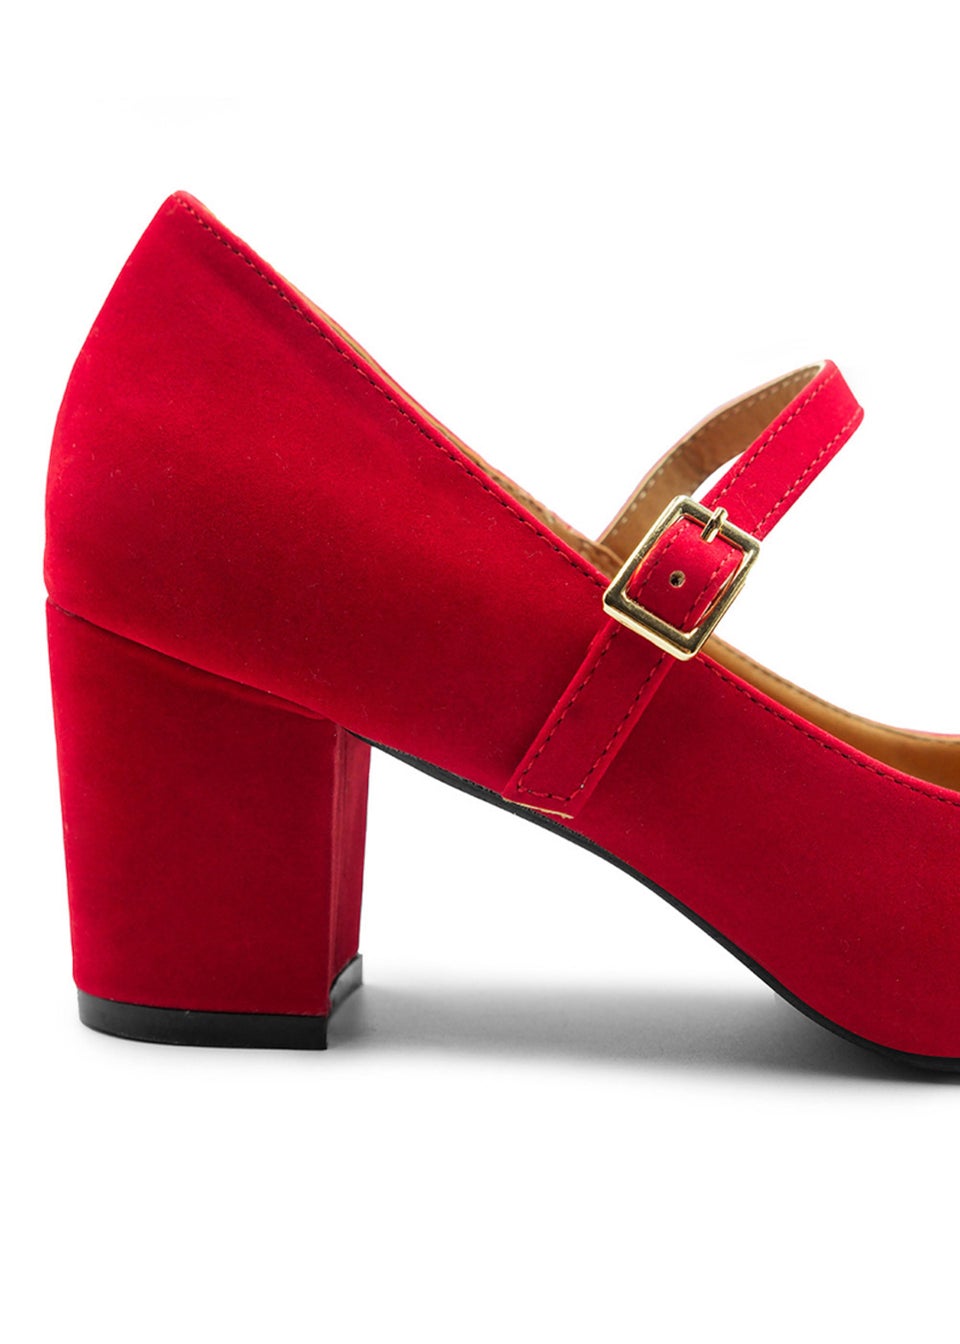 Where's That From Araceli Block Heel Mary Jane Pumps In Red Suede